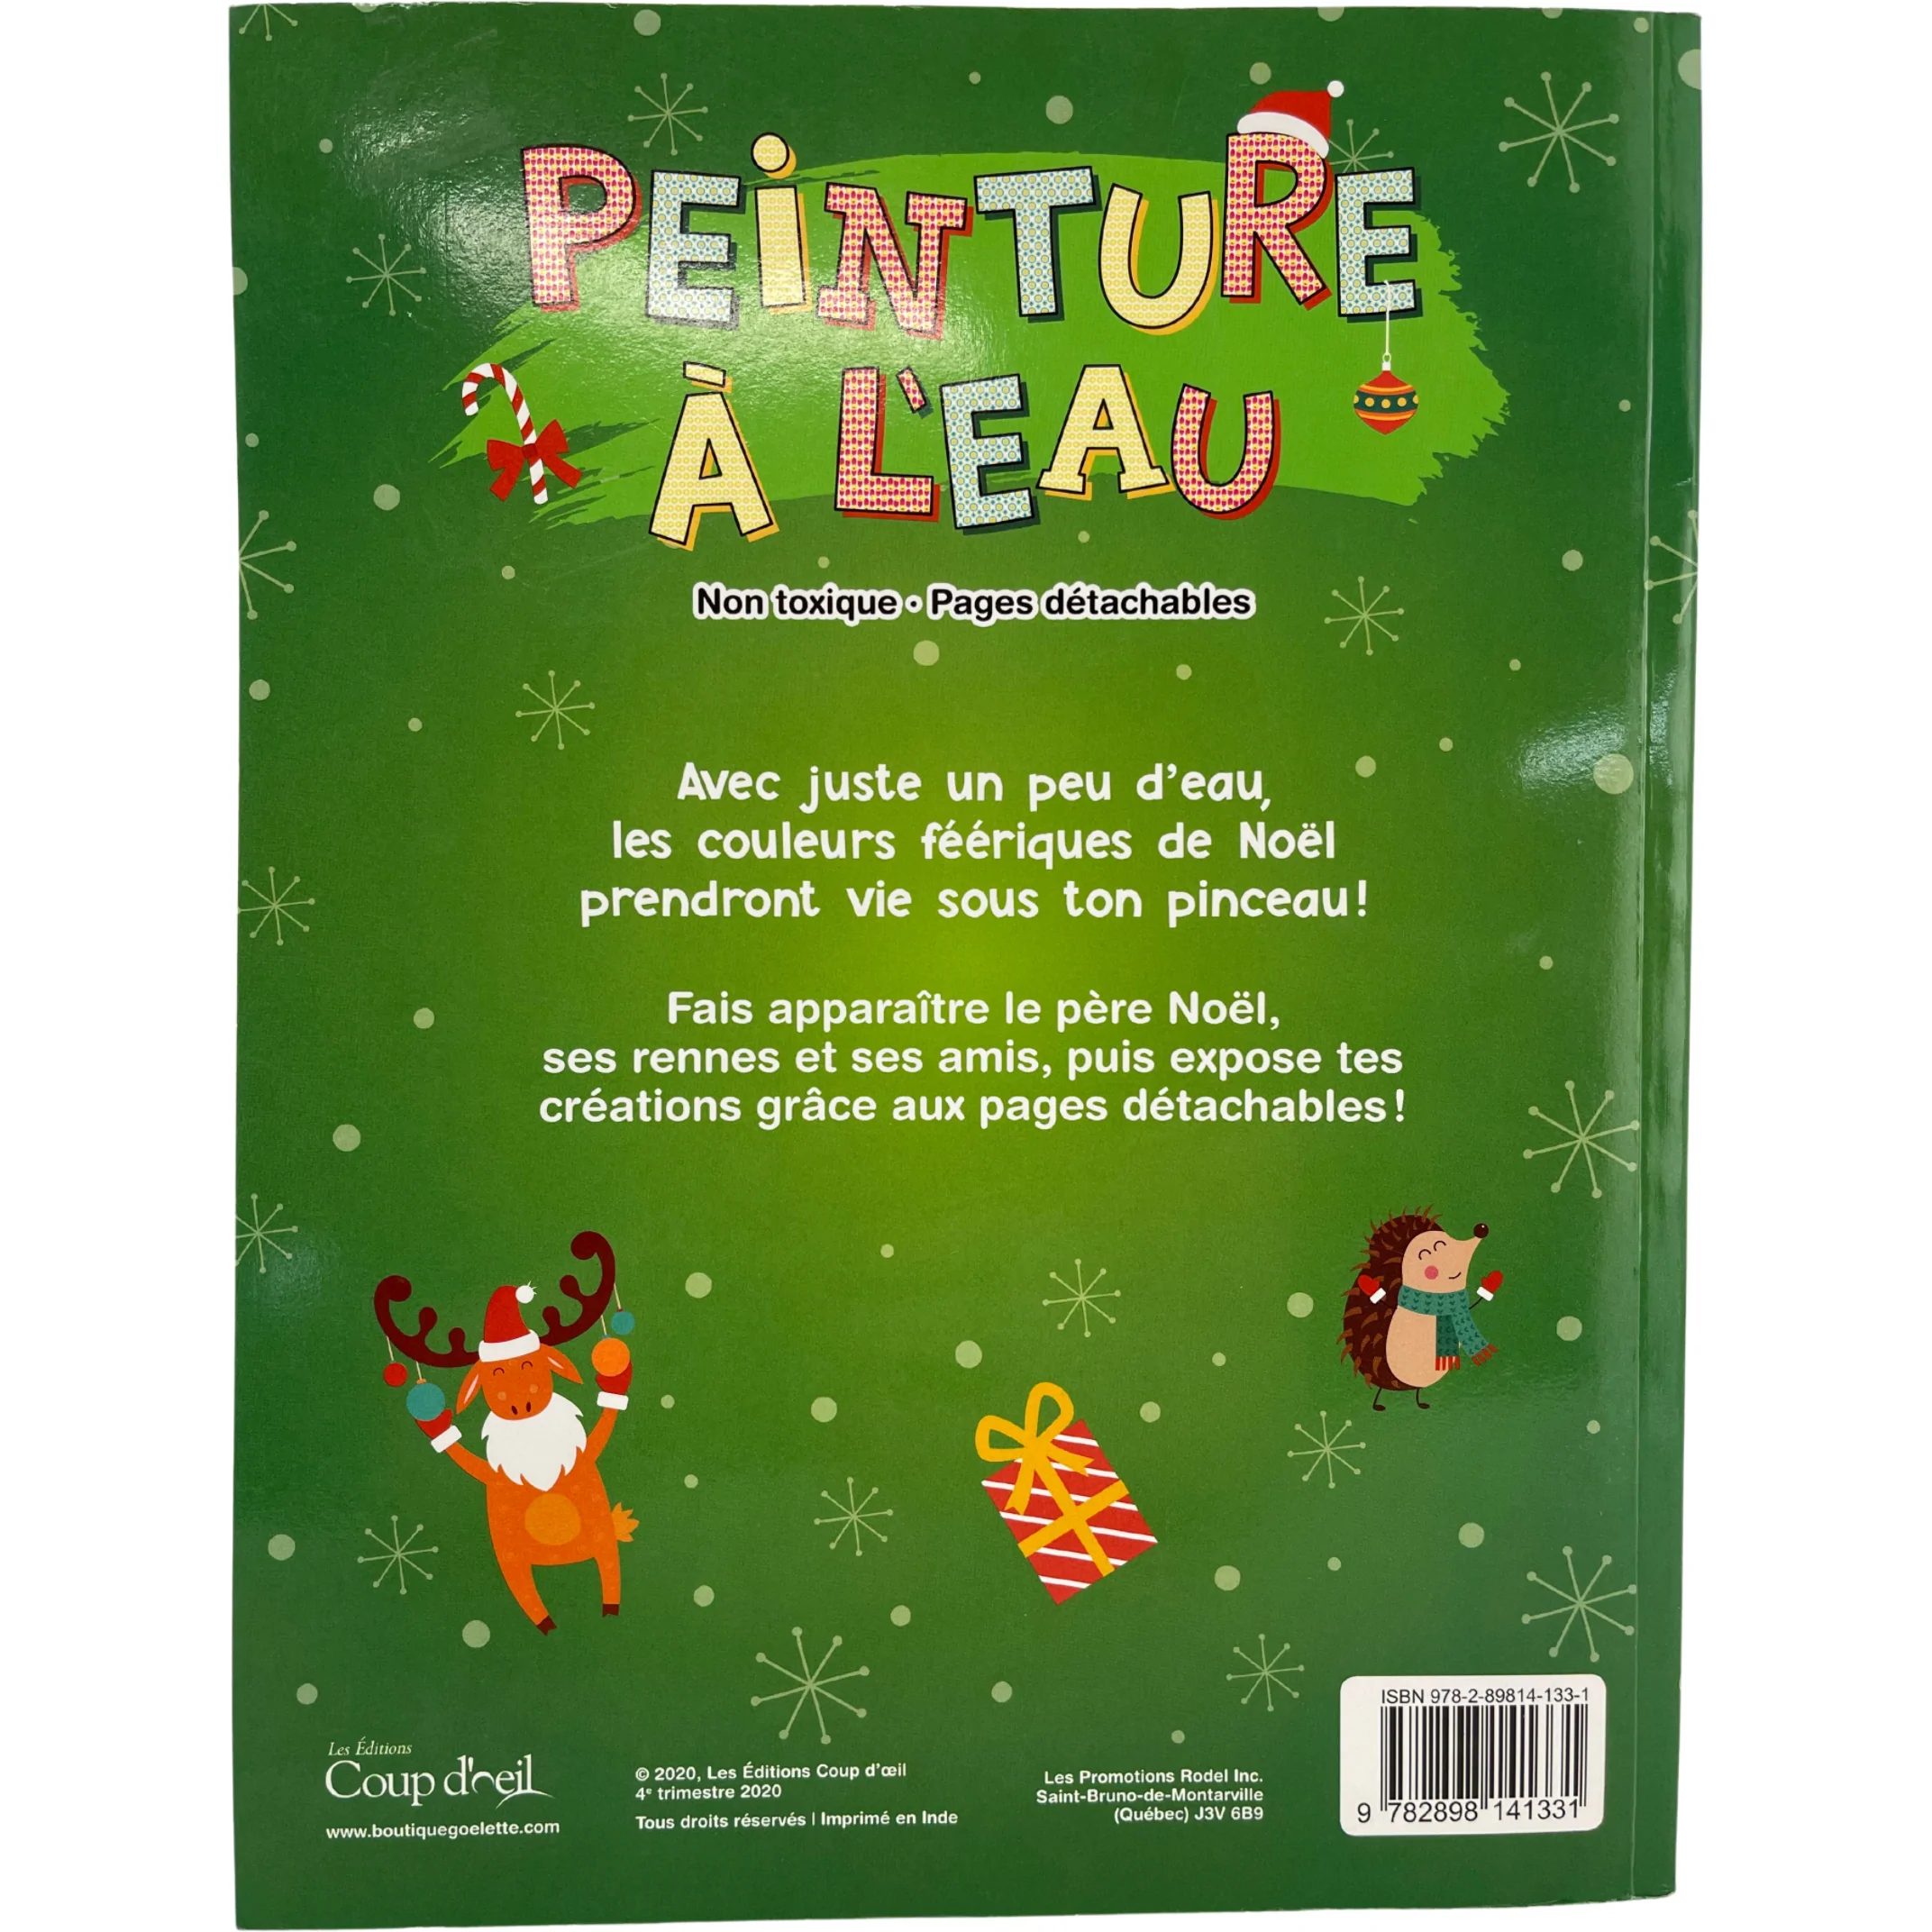 Coup D'oeil Christmas Water Colour Painting Book / French Edition / Paint with Water / Non Toxic / Holiday Season Crafts